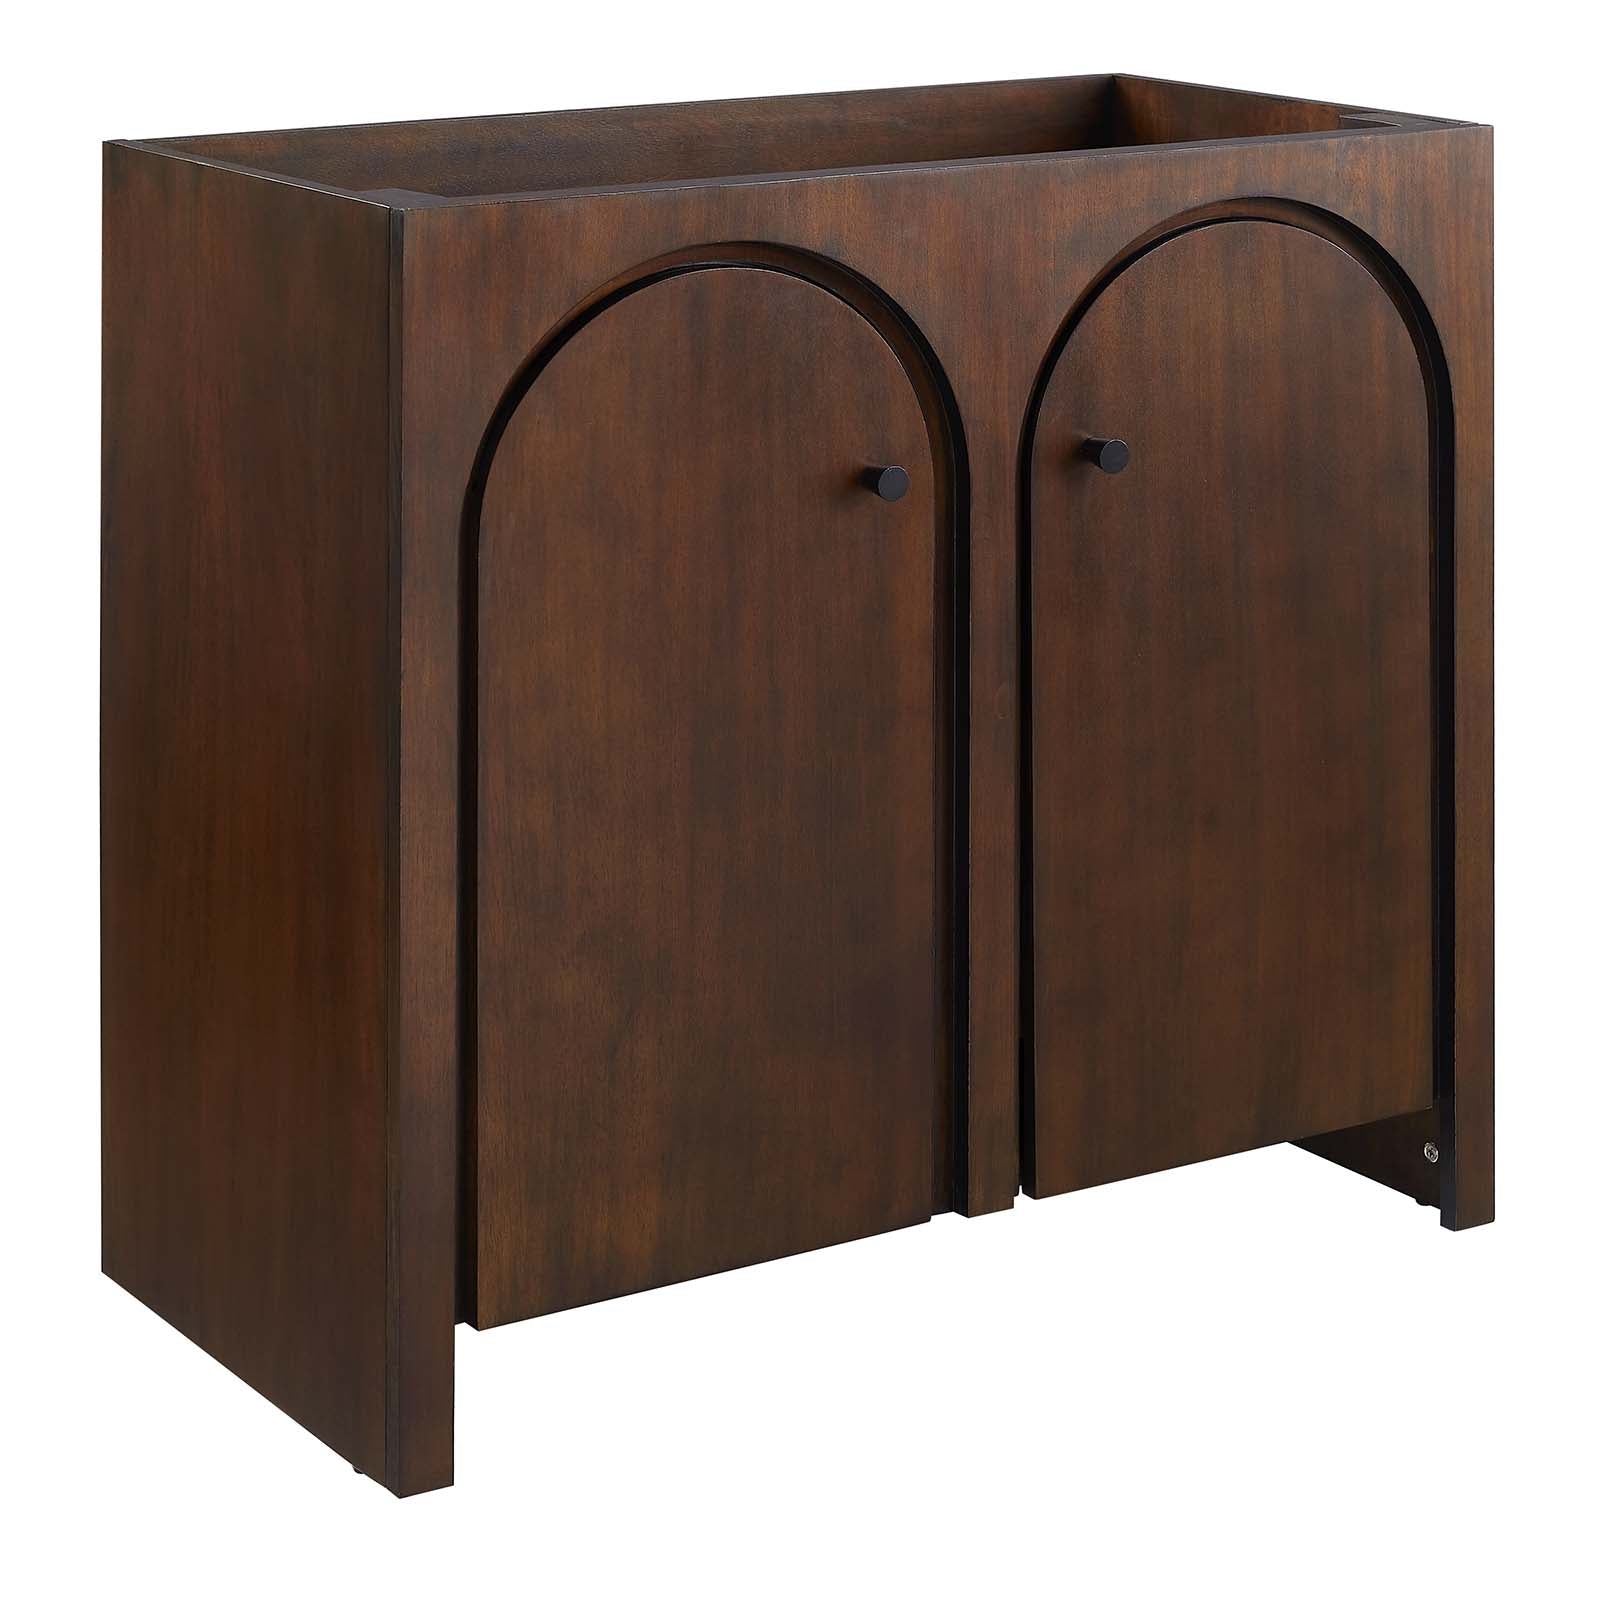 Appia 36" Bathroom Vanity Cabinet (Sink Basin Not Included) - East Shore Modern Home Furnishings